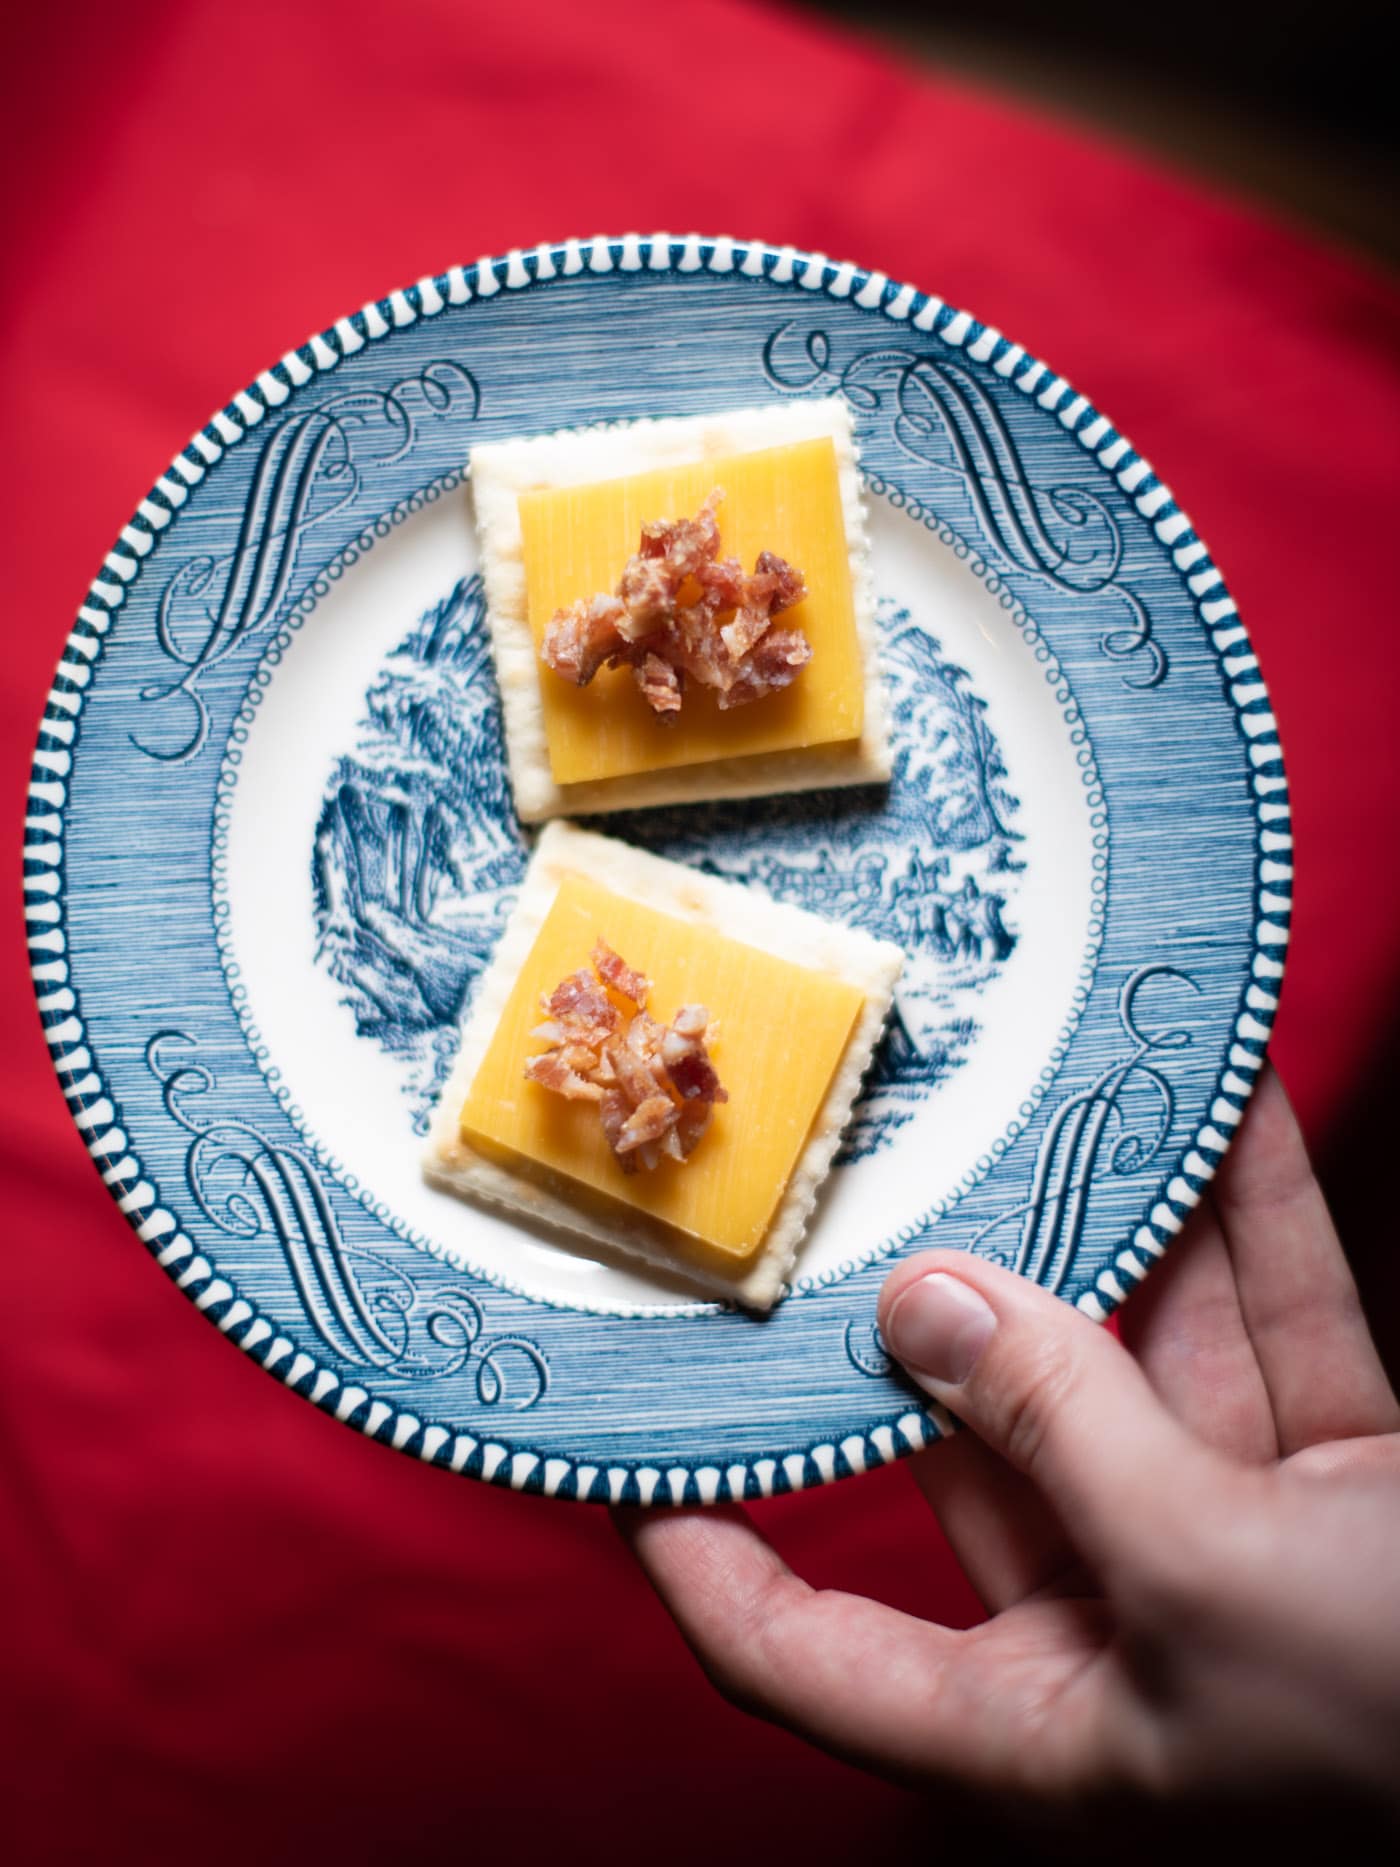 Candied bacon crackers